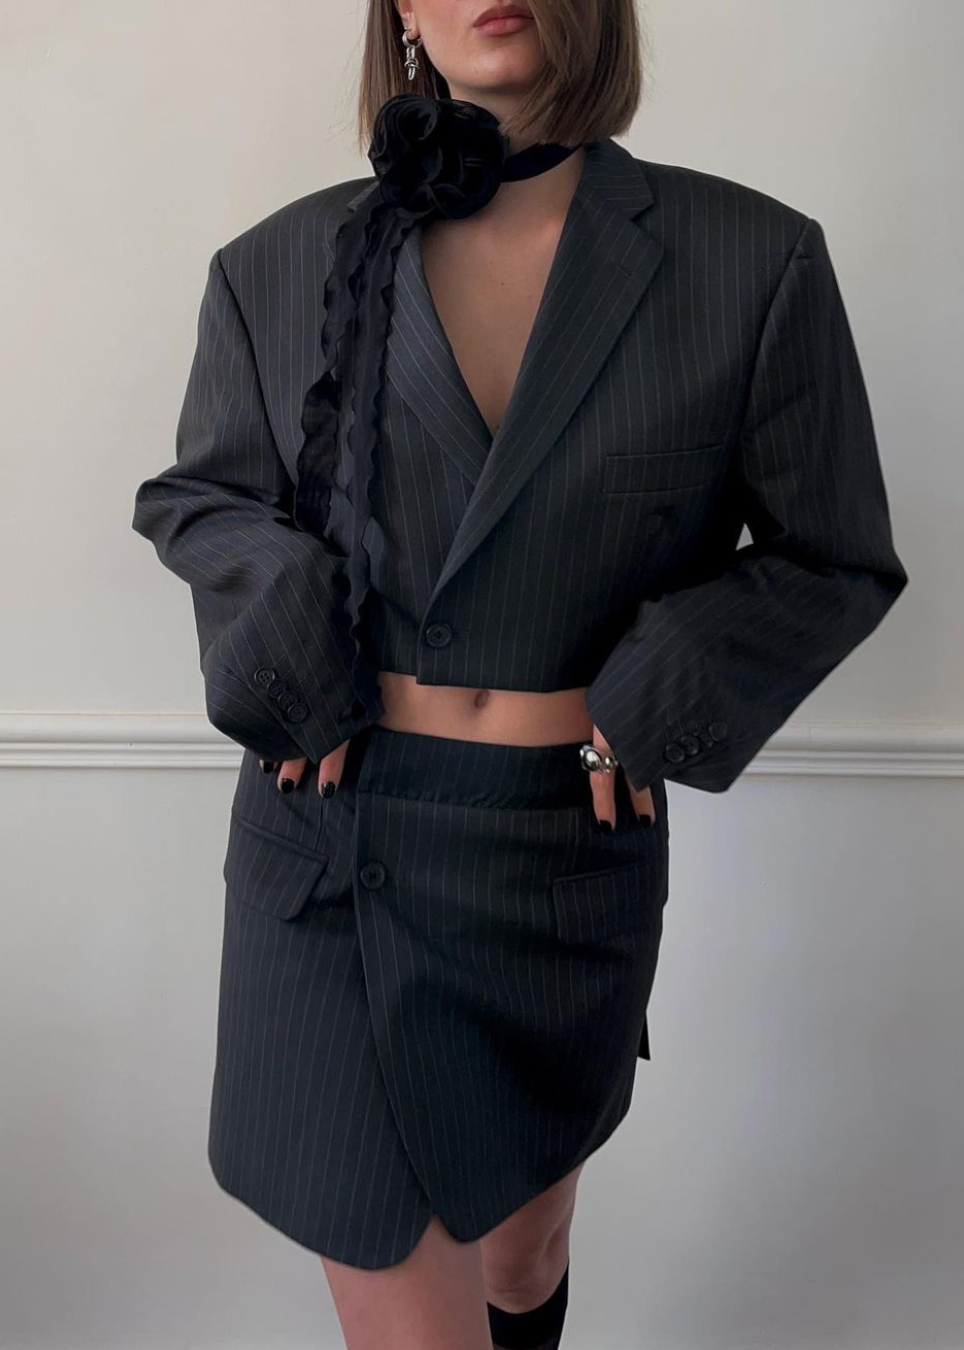 The Office Skirt Suit 